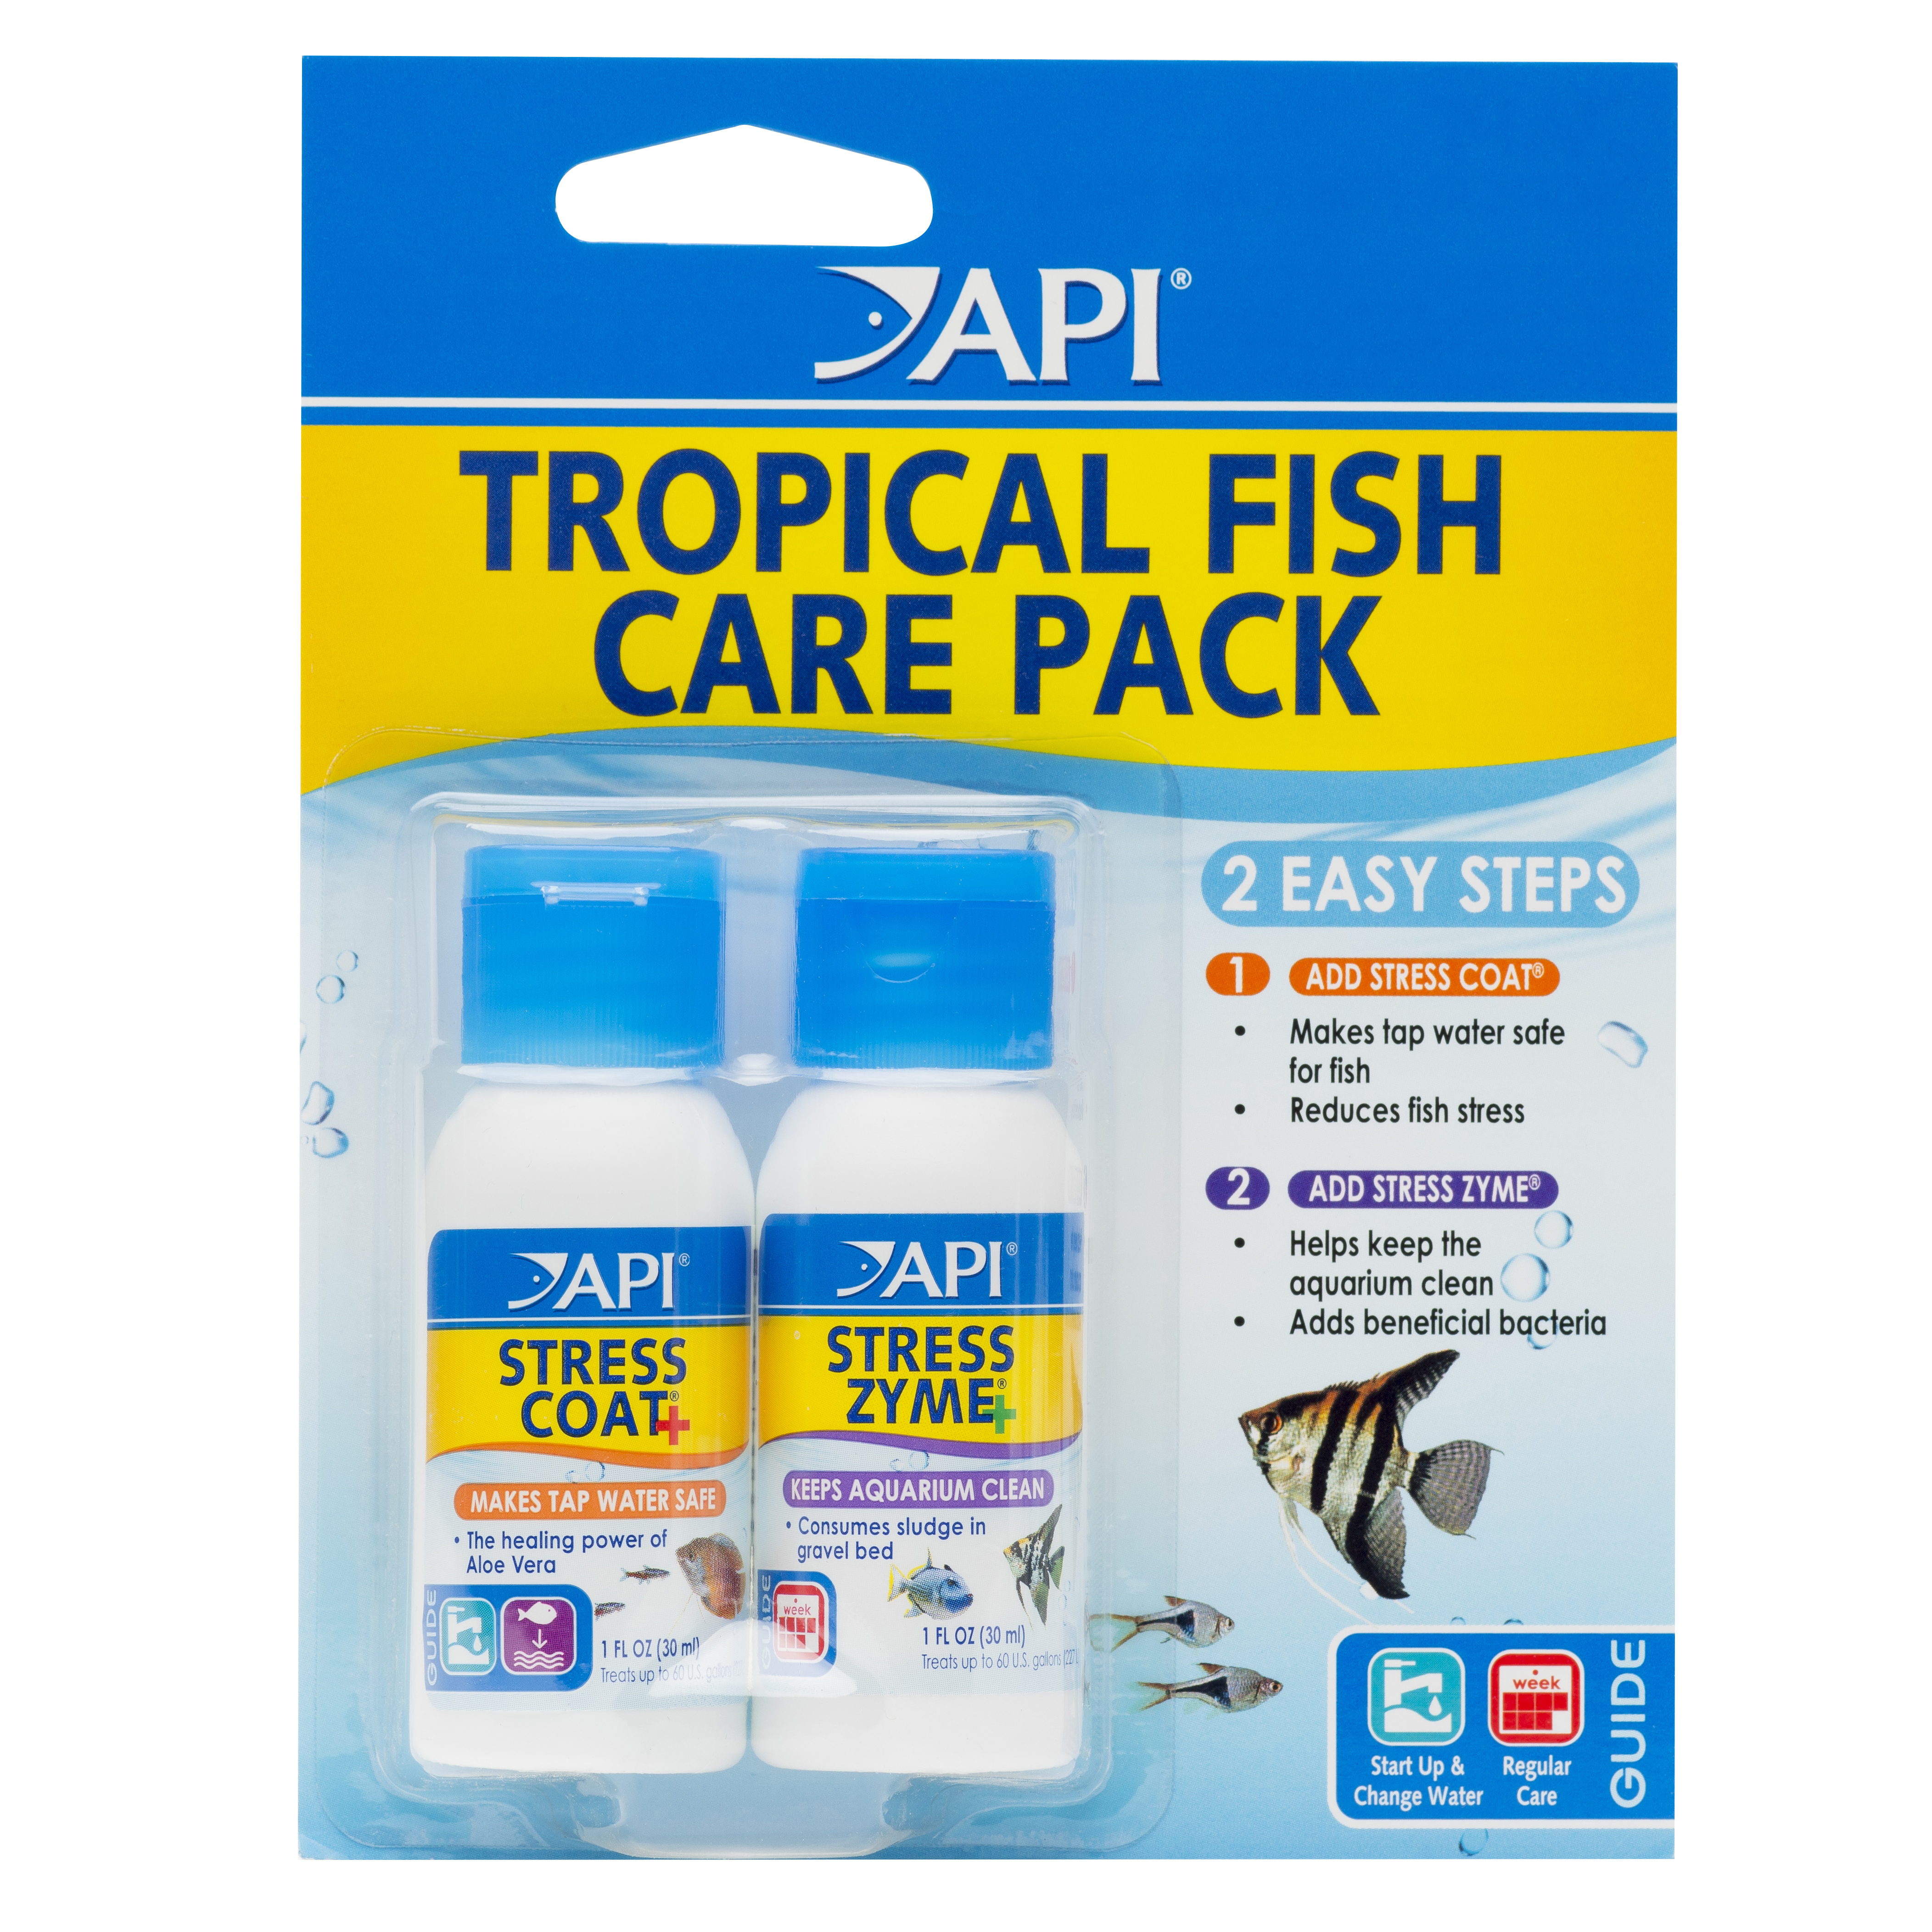 TROPICAL FISH CARE PACK